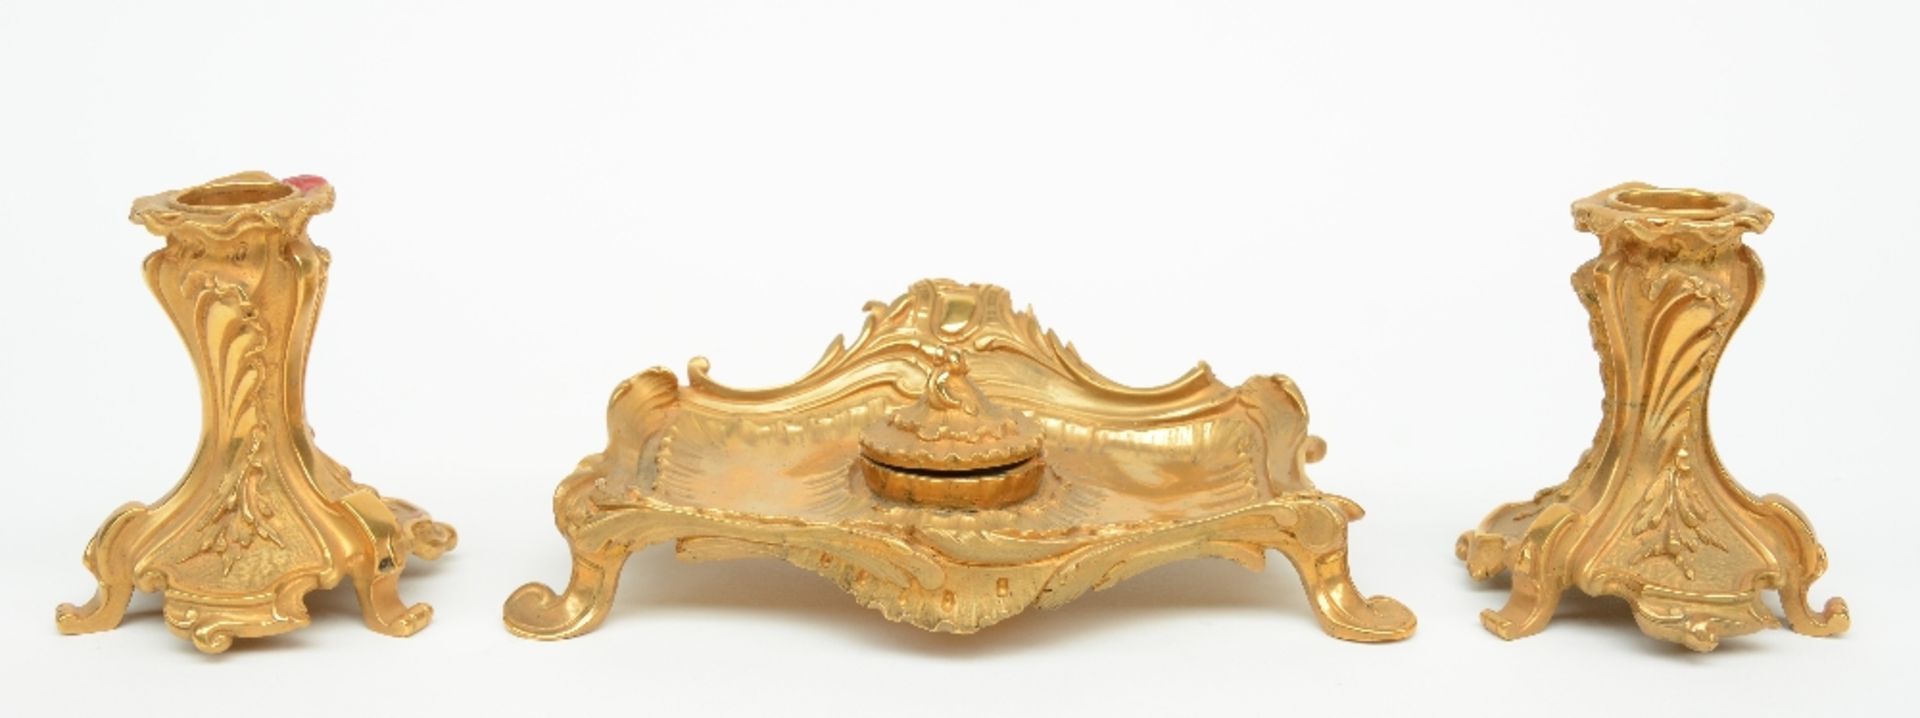 A fine LXV style ormolu bronze ink stand with a ditto pair of candlesticks, 19thC, H 9 - B 19 - D